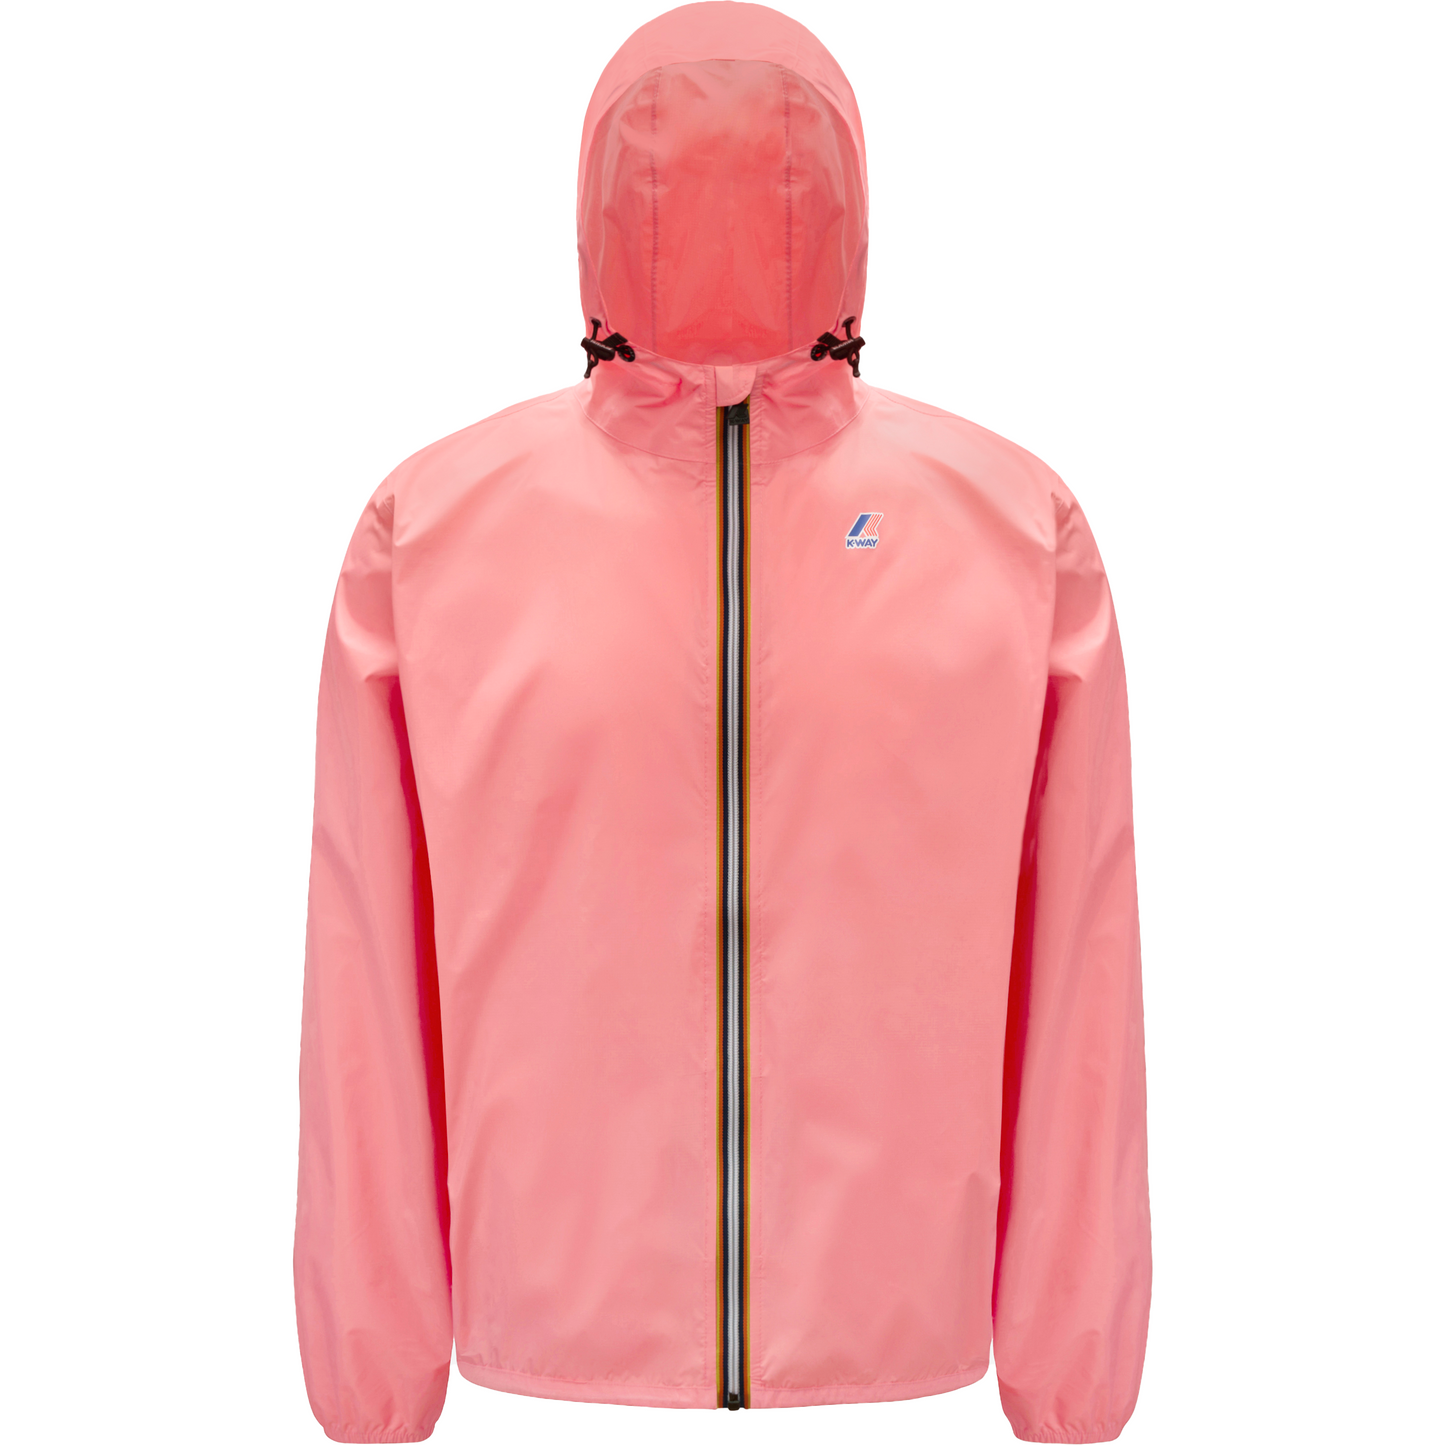 Bright pink water-repellent hooded jacket with a frontal reflective zip closure, featuring a small logo on the left chest. Le Vrai 3.0 Claude, Pink MD by K-Way.